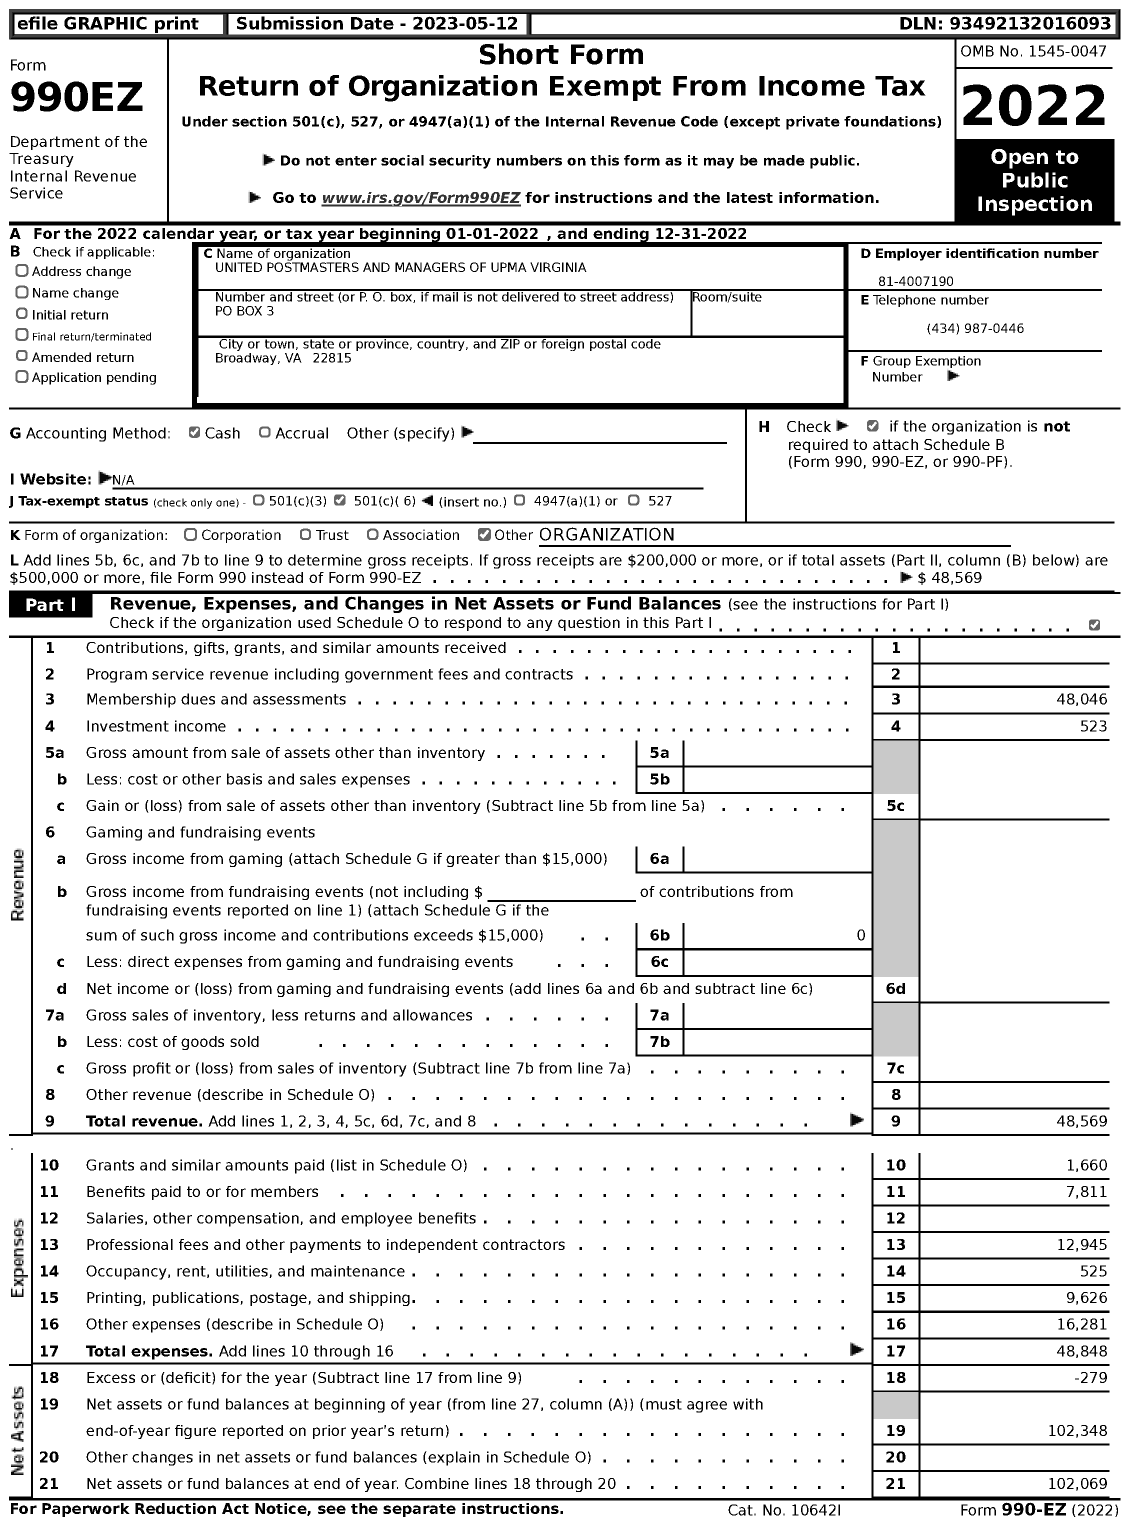 Image of first page of 2022 Form 990EZ for UNITED POSTMASTERS AND MANAGERS OF UPMA Virginia